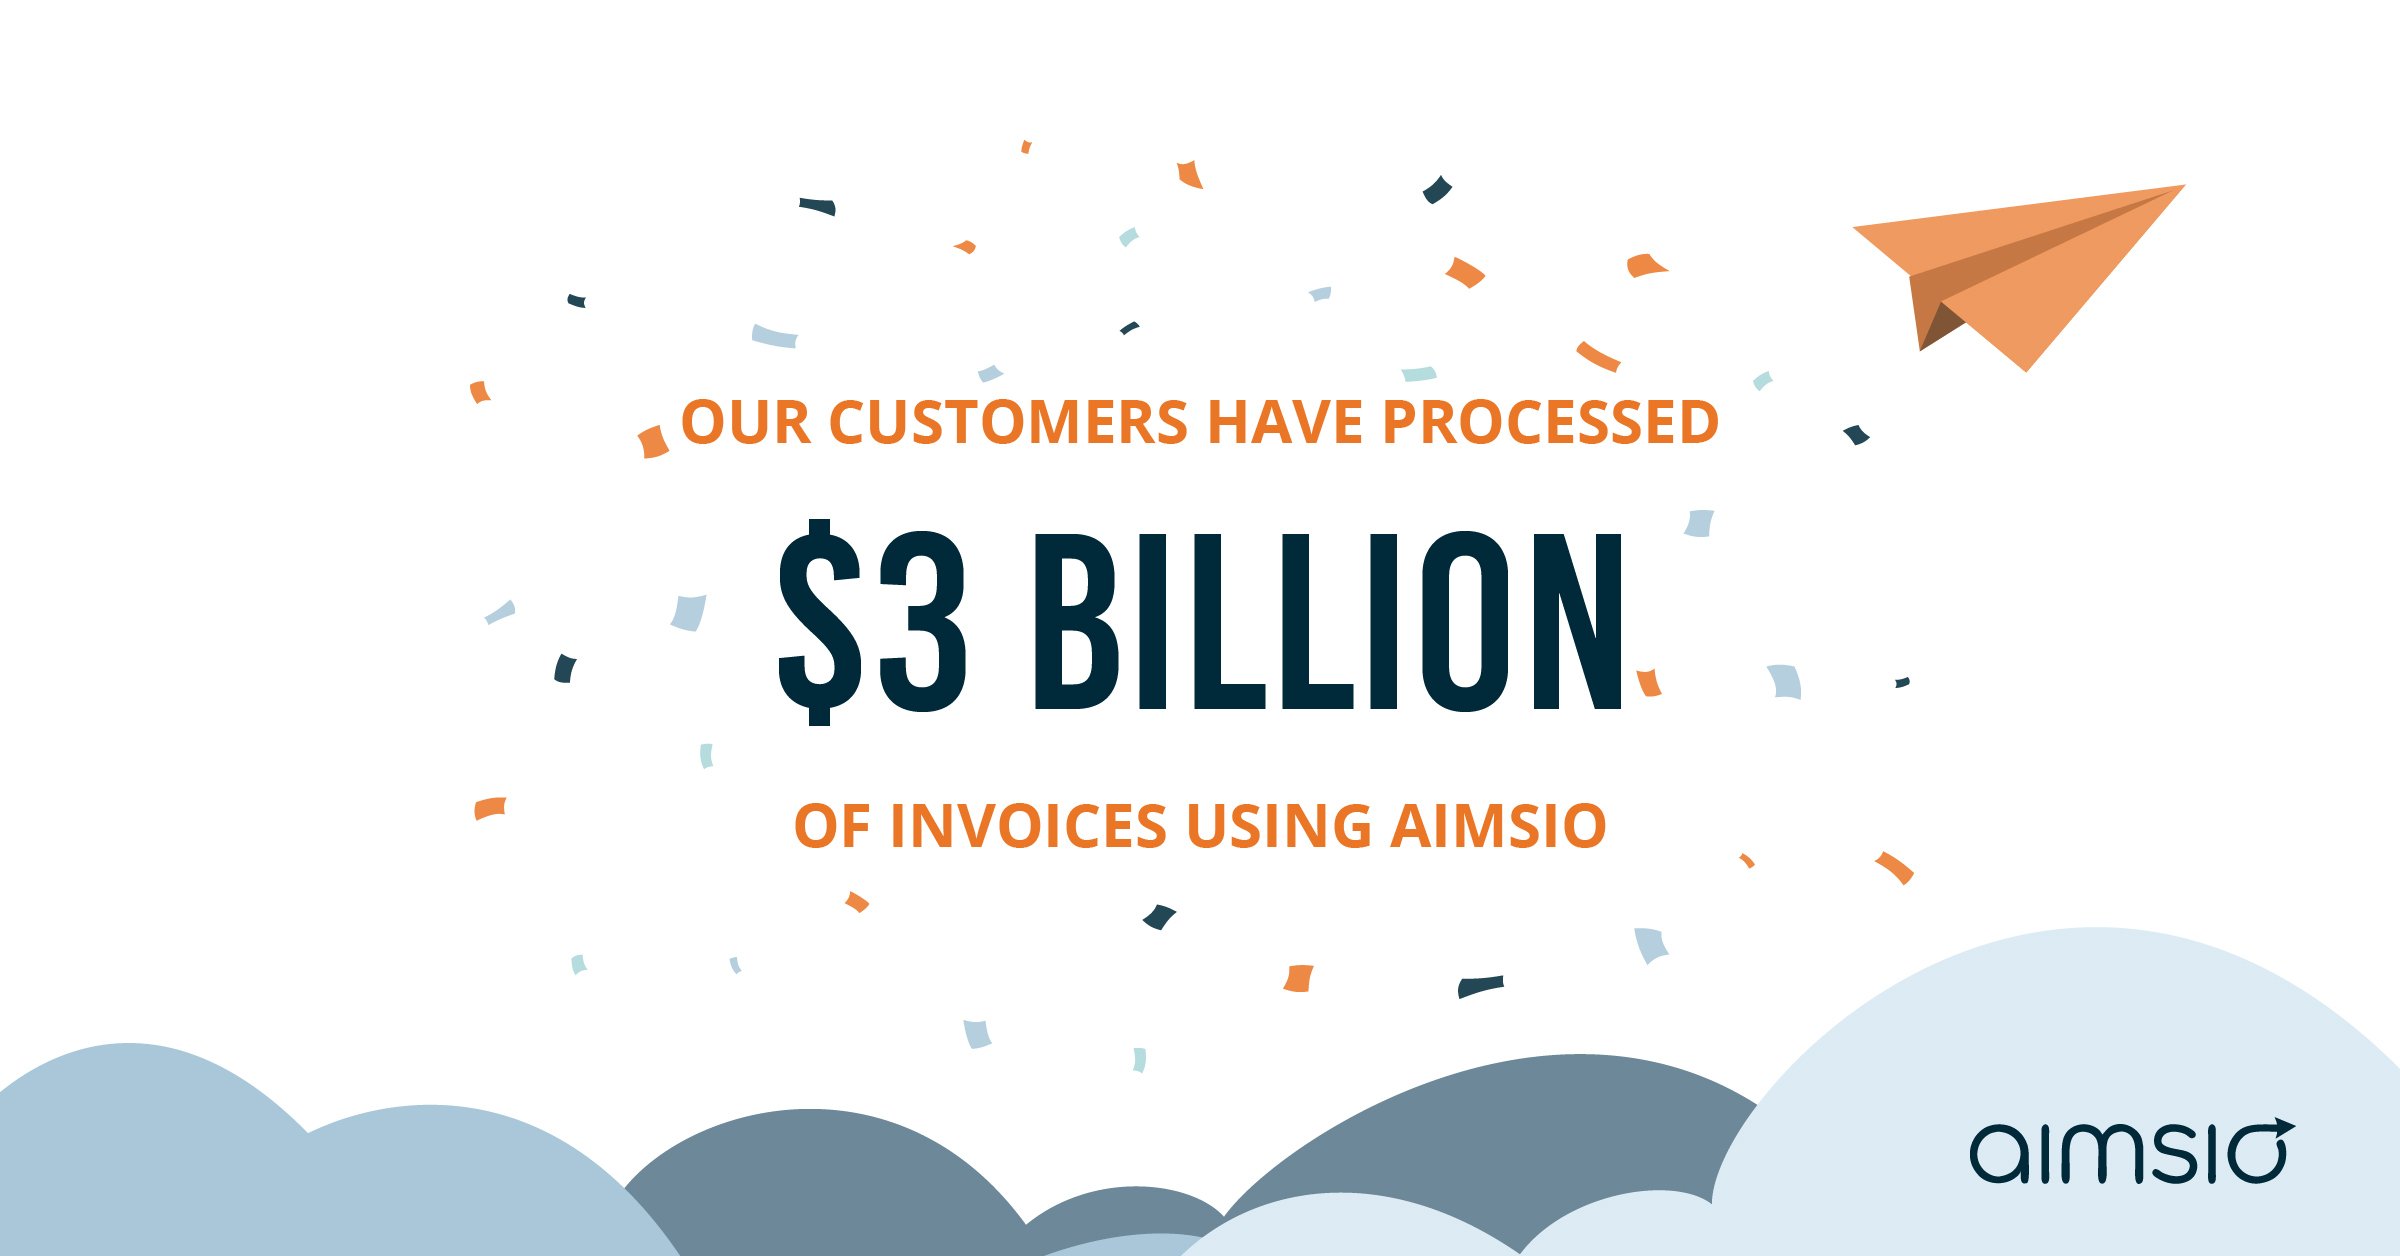 Aimsio software used to process 3 billion dollars worth of invoices